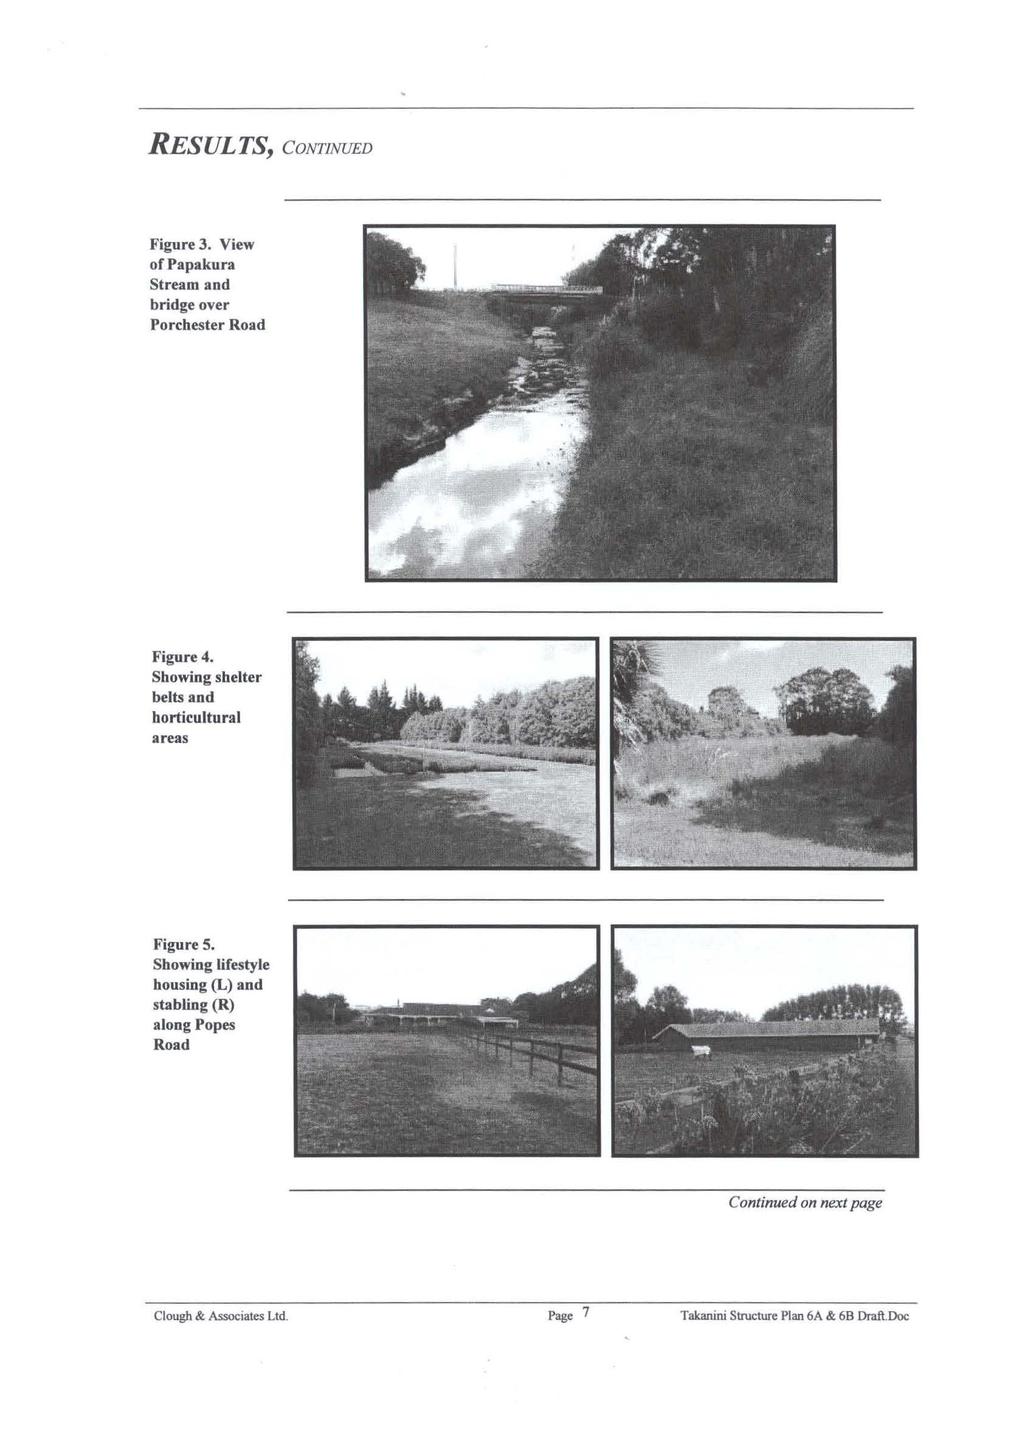 RESULTS, CONTJNUED Figure 3. View ofpapakura Stream and bridge over Porchester Road Figure 4. Showing shelter belts and horticultural areas Figure 5.